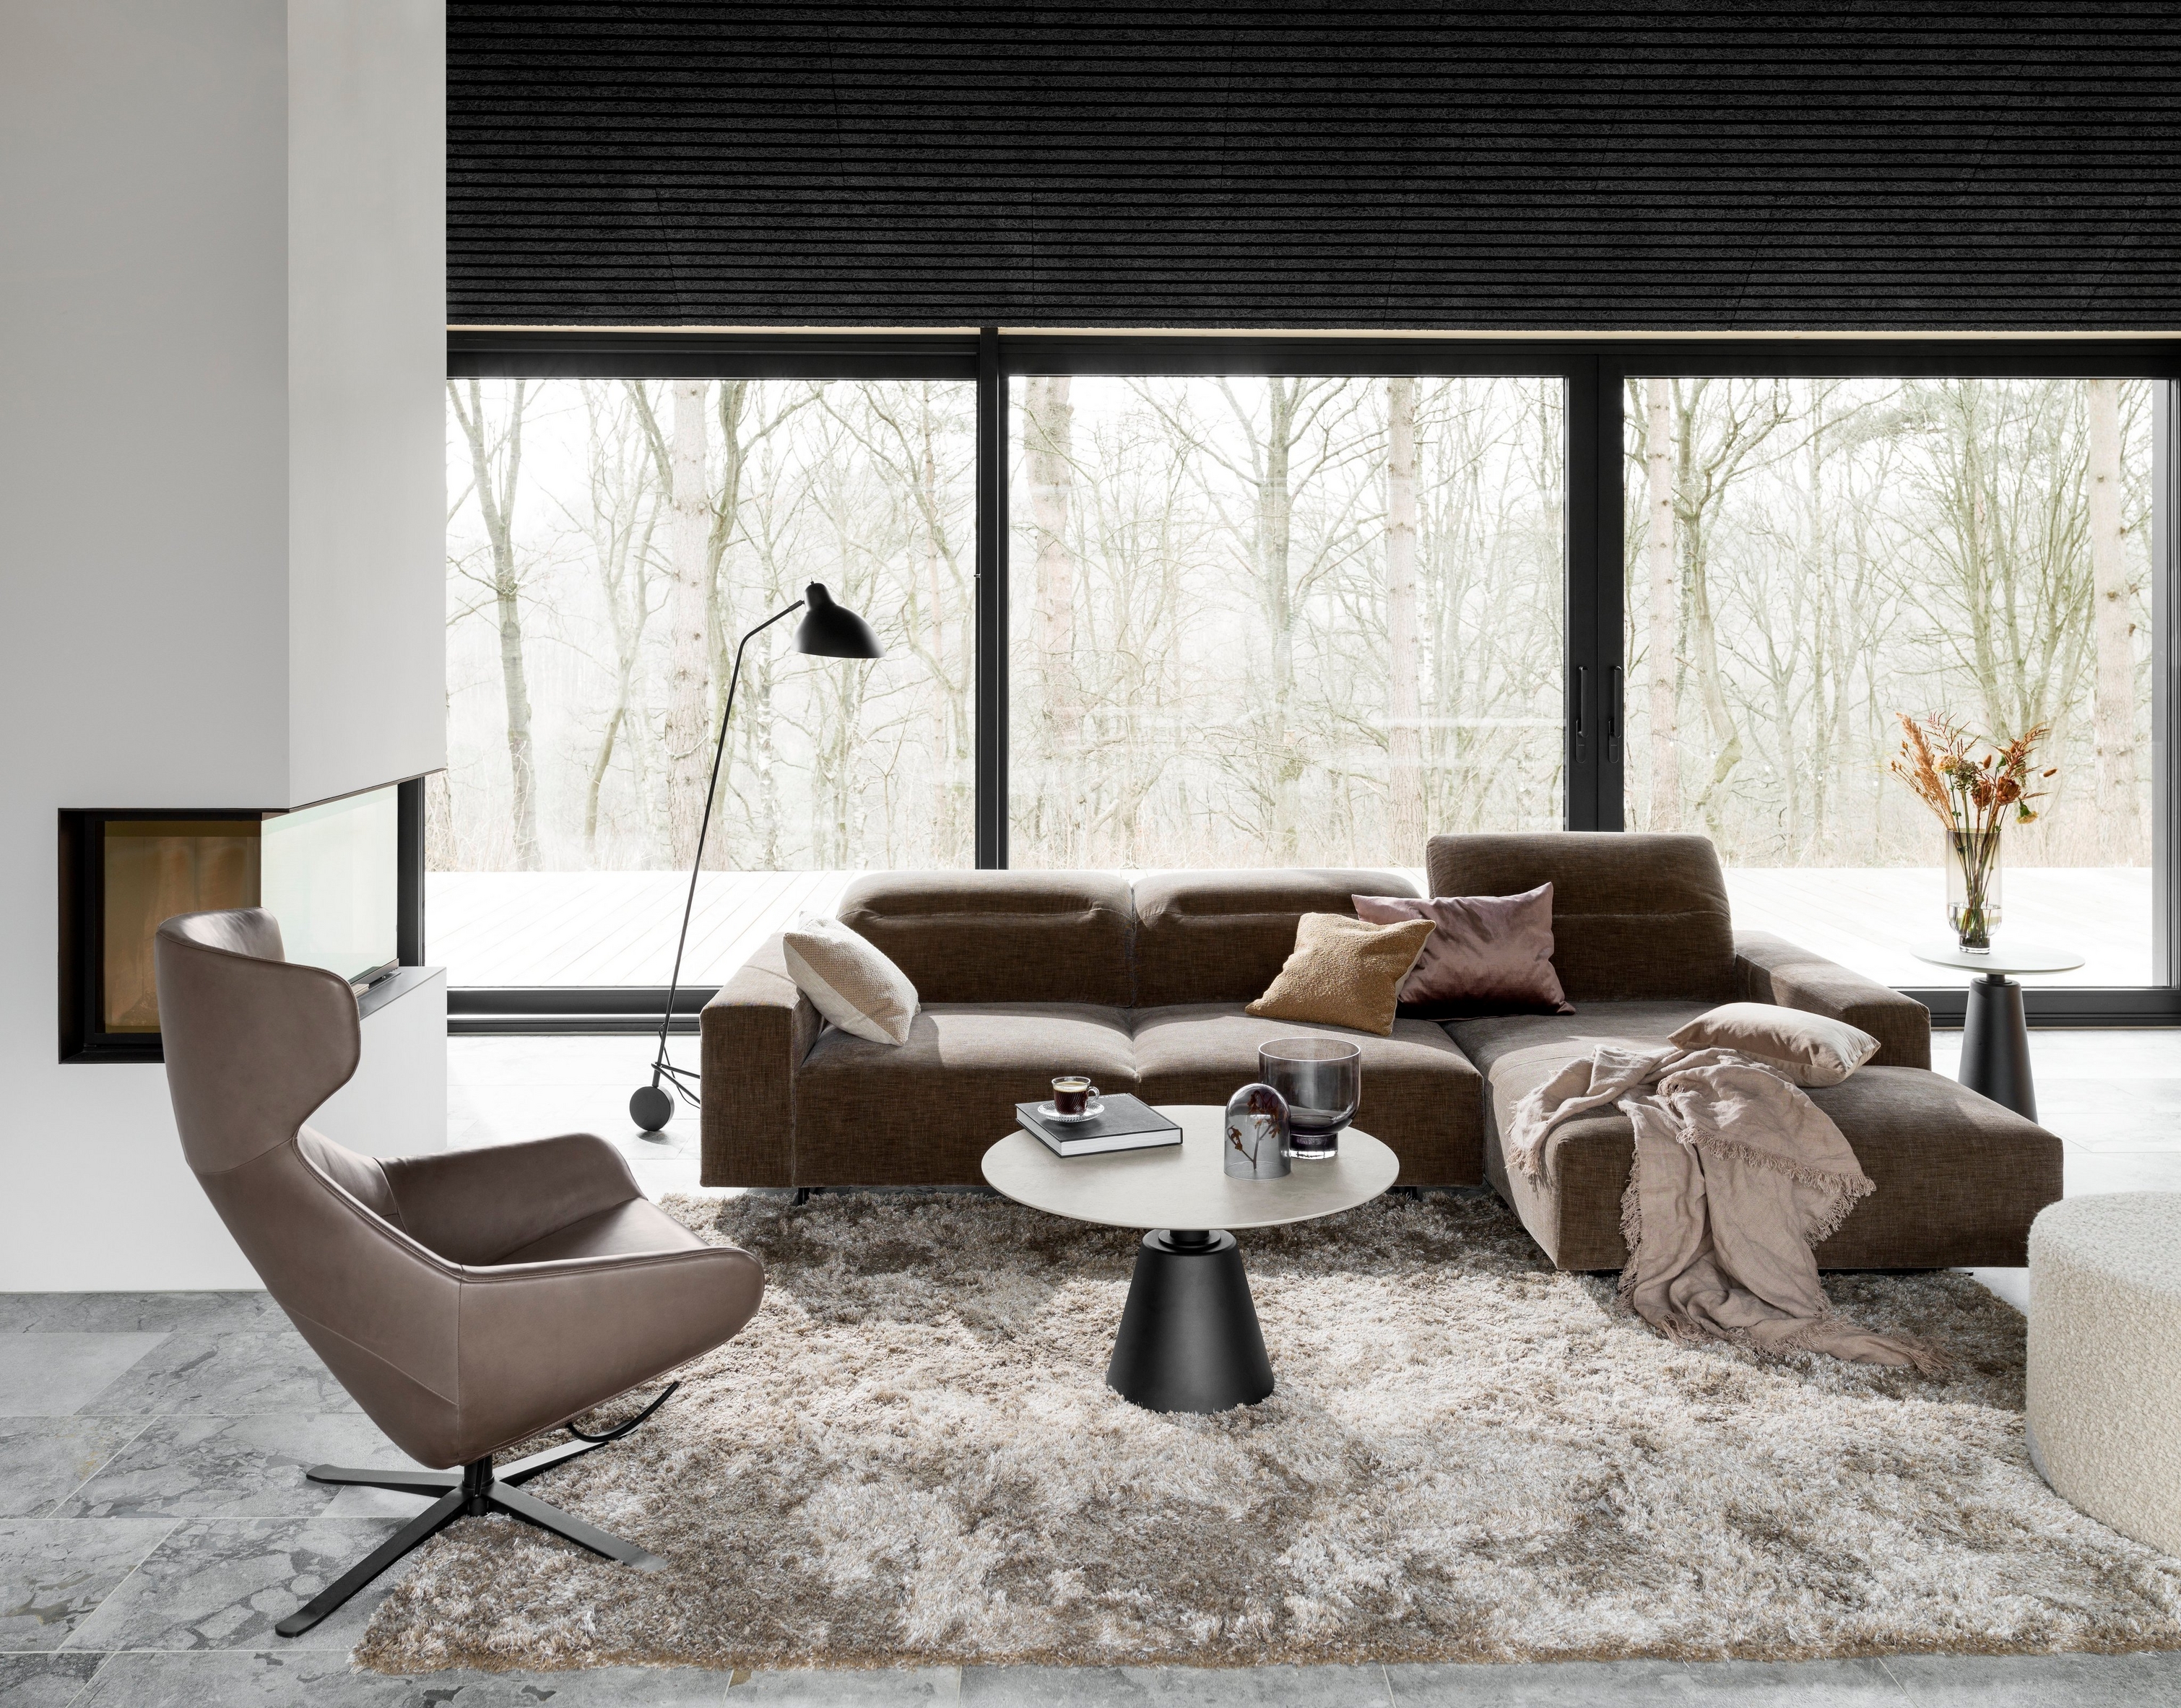 Modern living room with brown sectional sofa, gray rug, and black floor lamp by window.